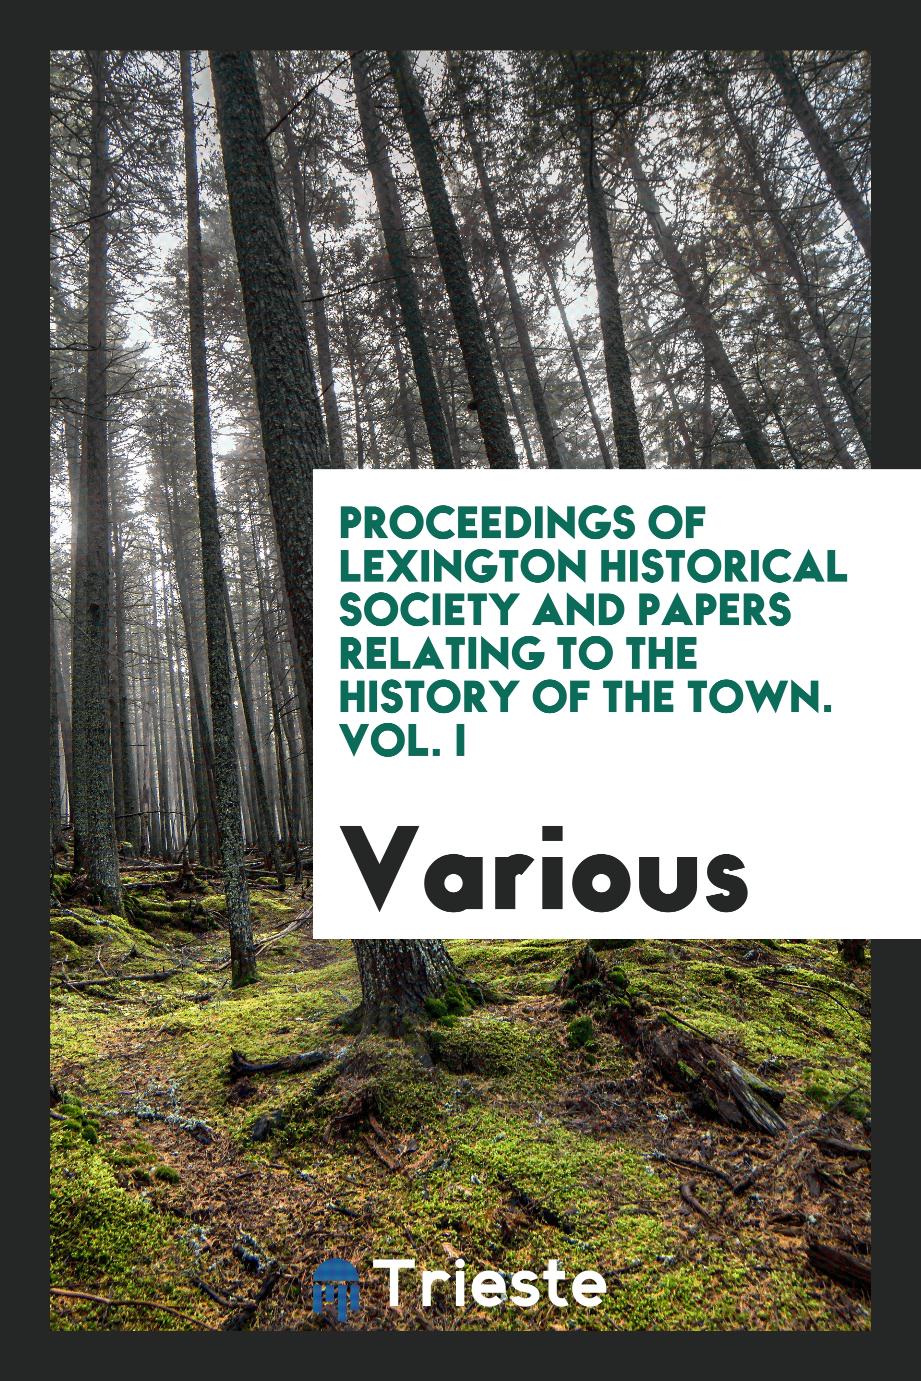 Proceedings of Lexington Historical Society and Papers Relating to the History of the Town. Vol. I